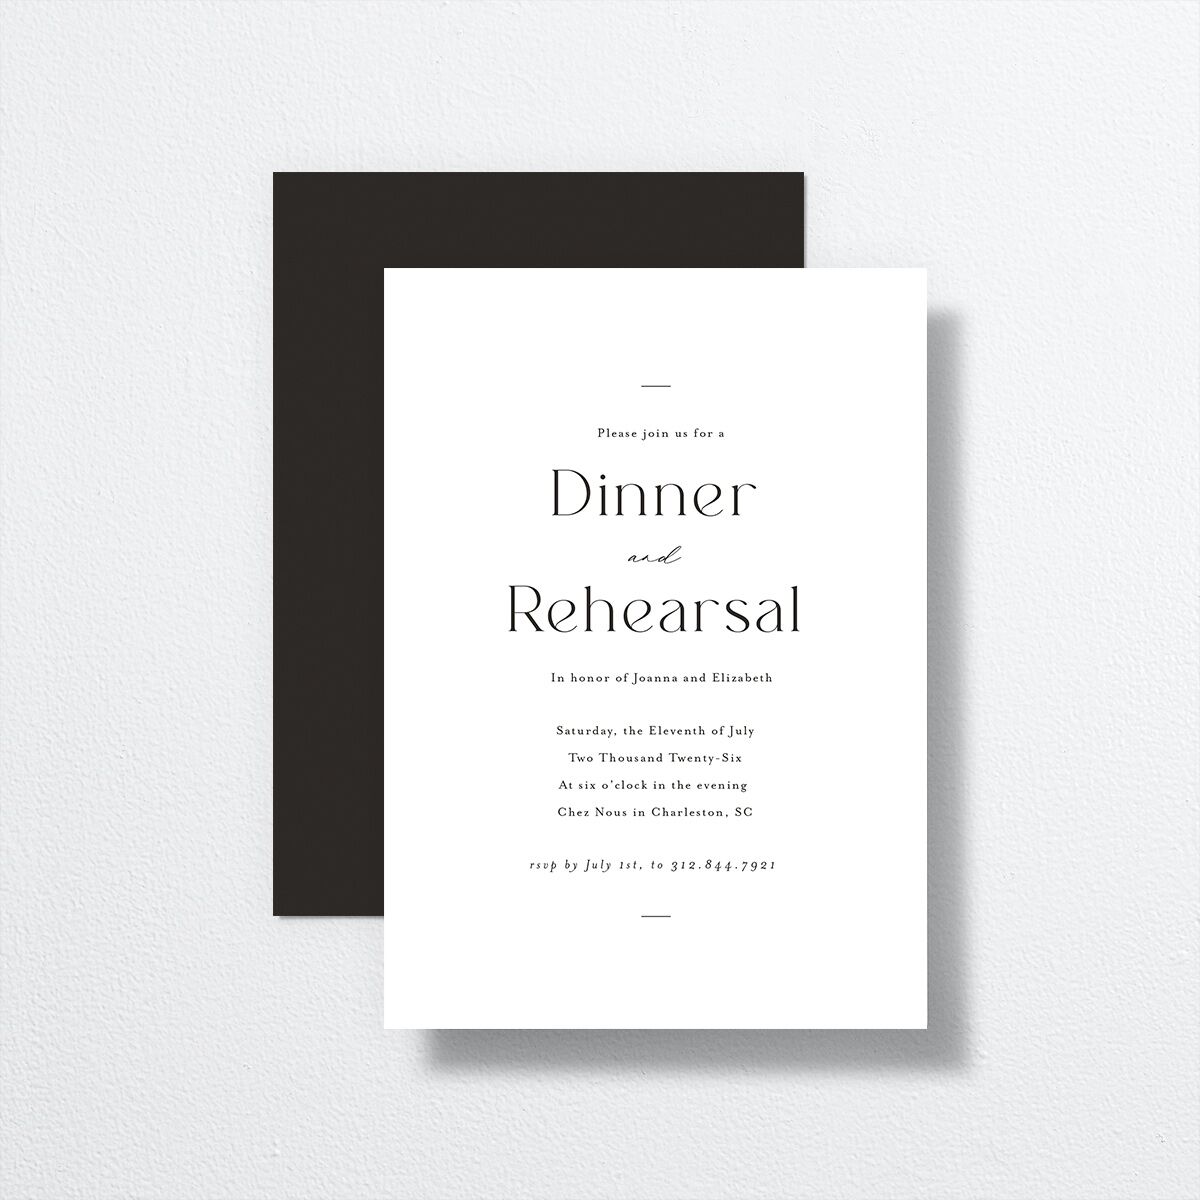 Refined Rehearsal Dinner Invitations front-and-back in white